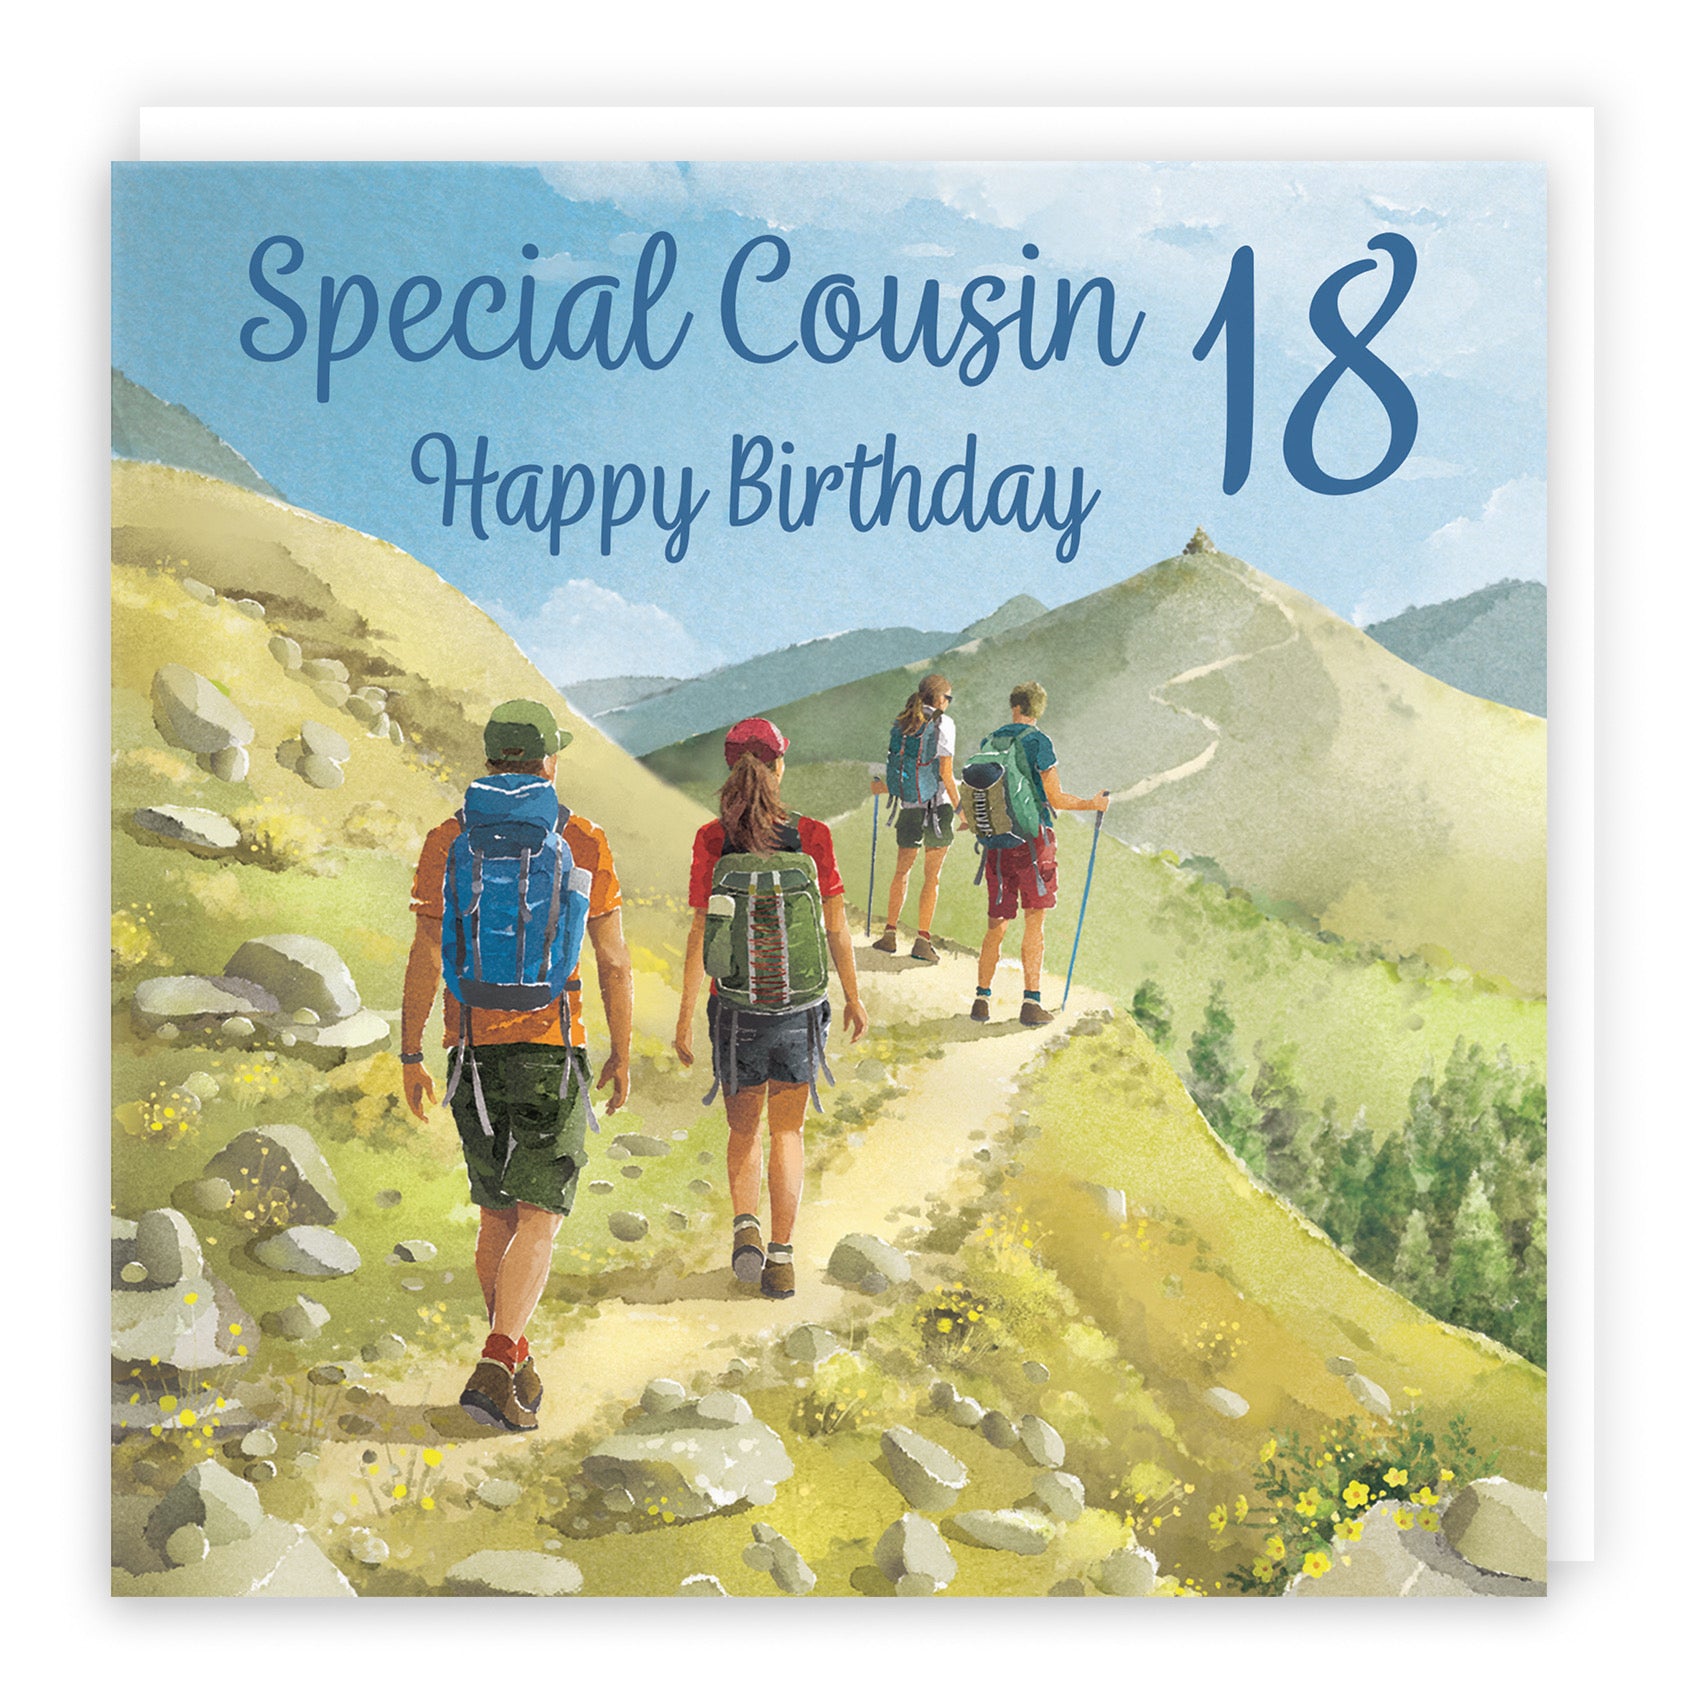 18th Cousin Walking Birthday Card Milo's Gallery - Default Title (B0CR1T4D5M)